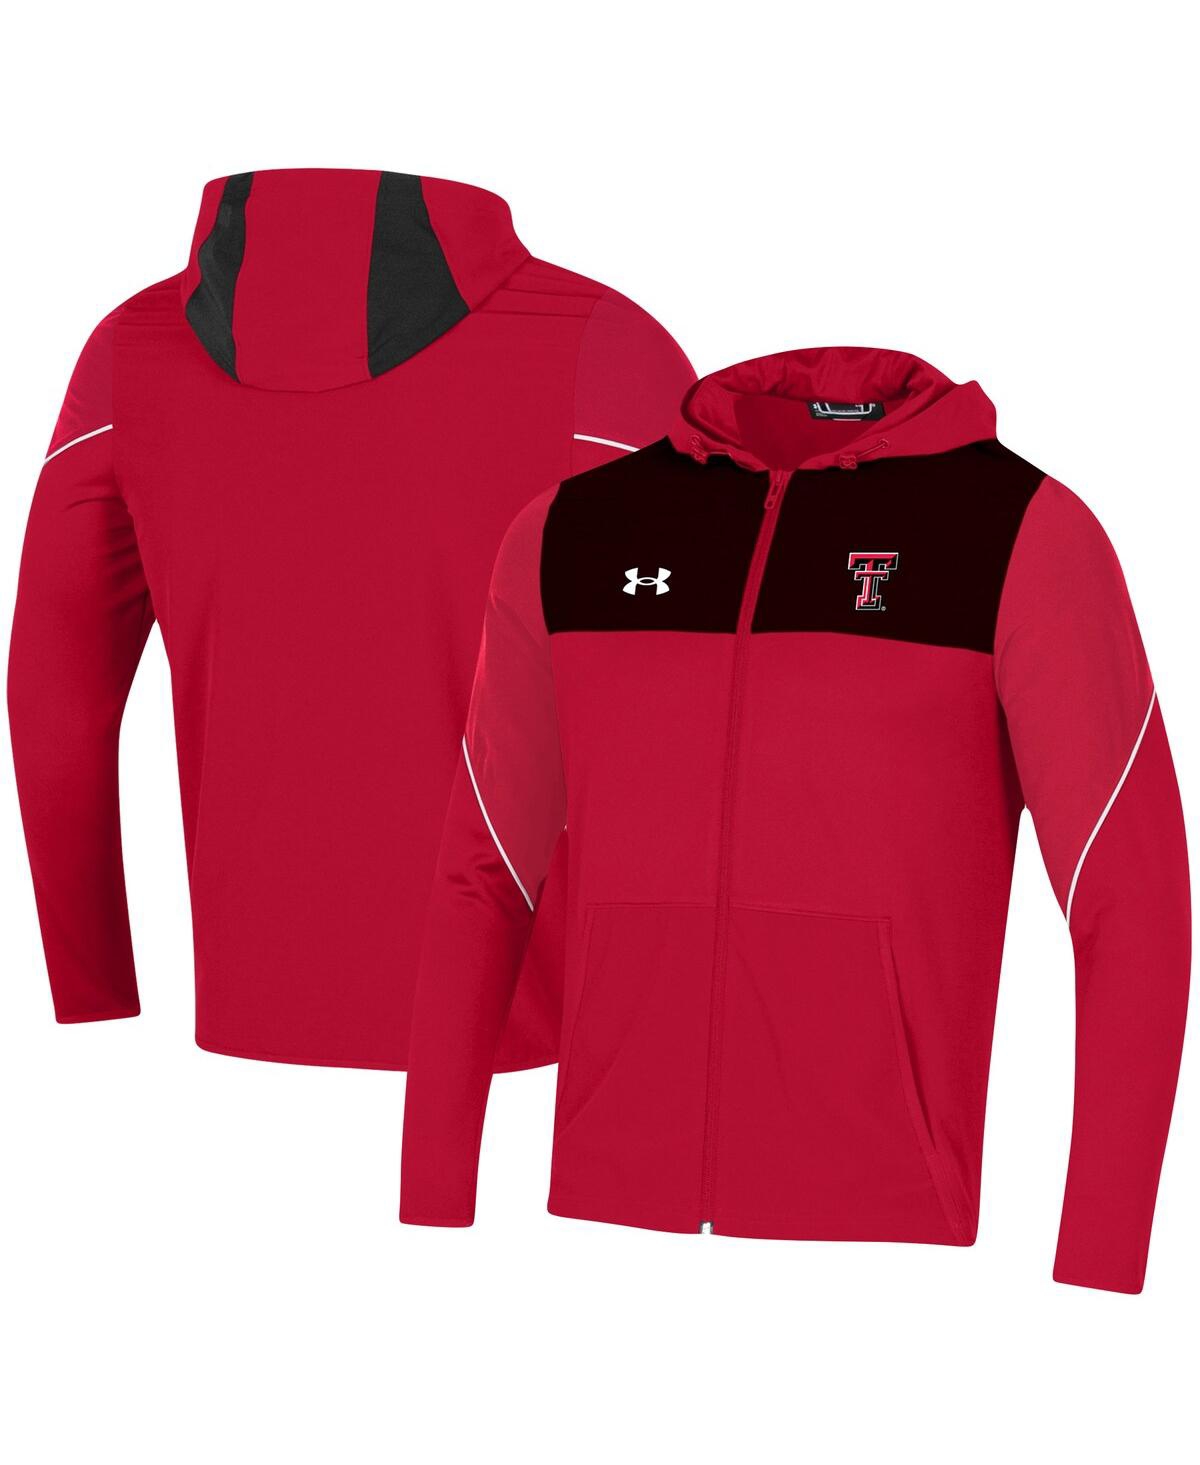 Shop Under Armour Men's  Red Texas Tech Red Raiders 2021 Sideline Warm-up Full-zip Hoodie